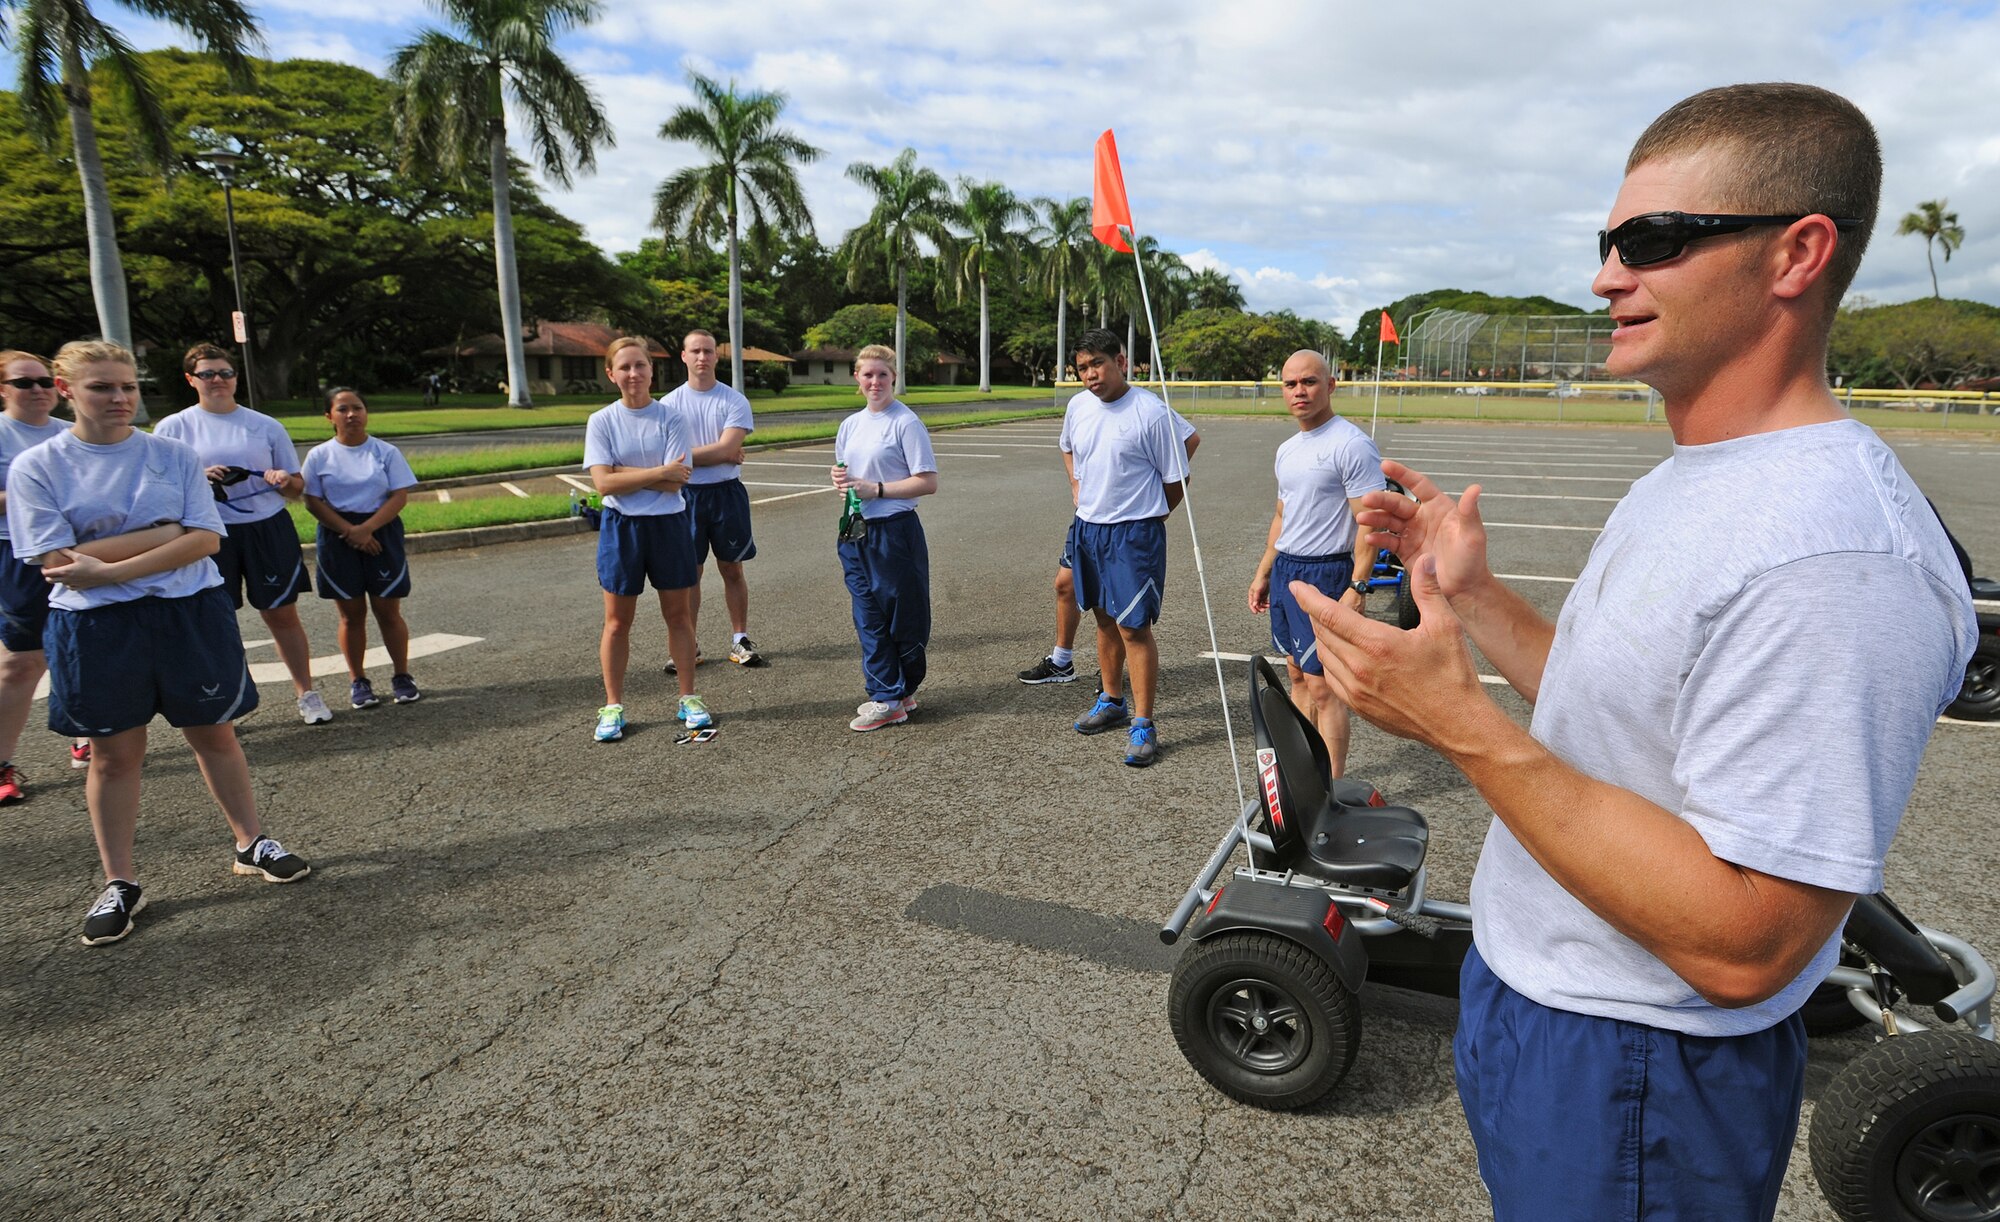 Tech. Sgt. Thomas Hazelwood, 15th Medical Group Alcohol and Drug Abuse Prevention Treatment NCO, briefs 15th MDG personnel on the importance of not drinking and driving during the group’s Wingman Day at Joint Base Pearl Harbor-Hickam, Hawaii, Feb. 20, 2014.  (U.S. Air Force photo/Master Sgt. Jerome S. Tayborn)